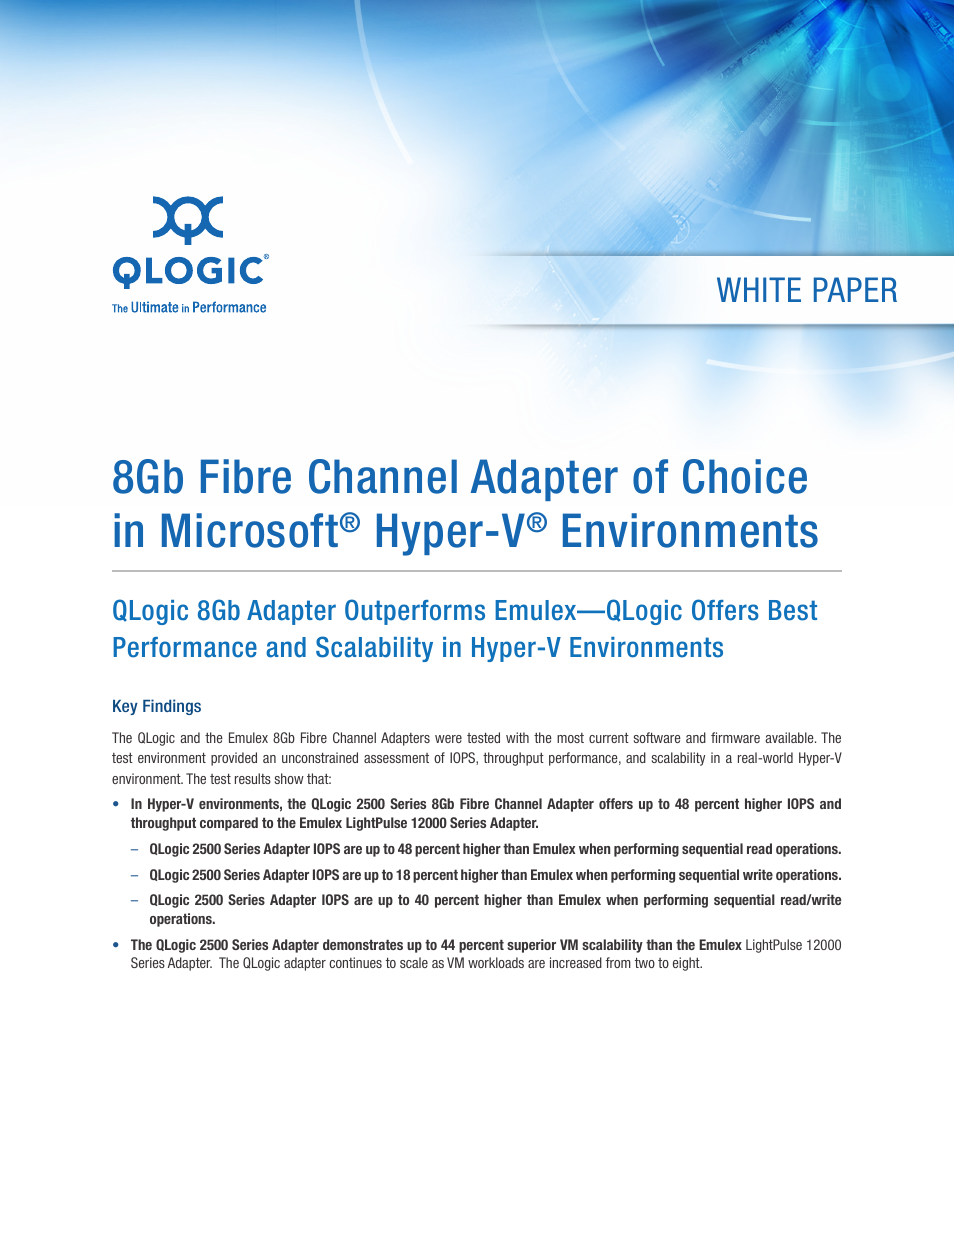 2500 Series 8Gb Fibre Channel Adapter of Choice in Microsoft Hyper-V Environments